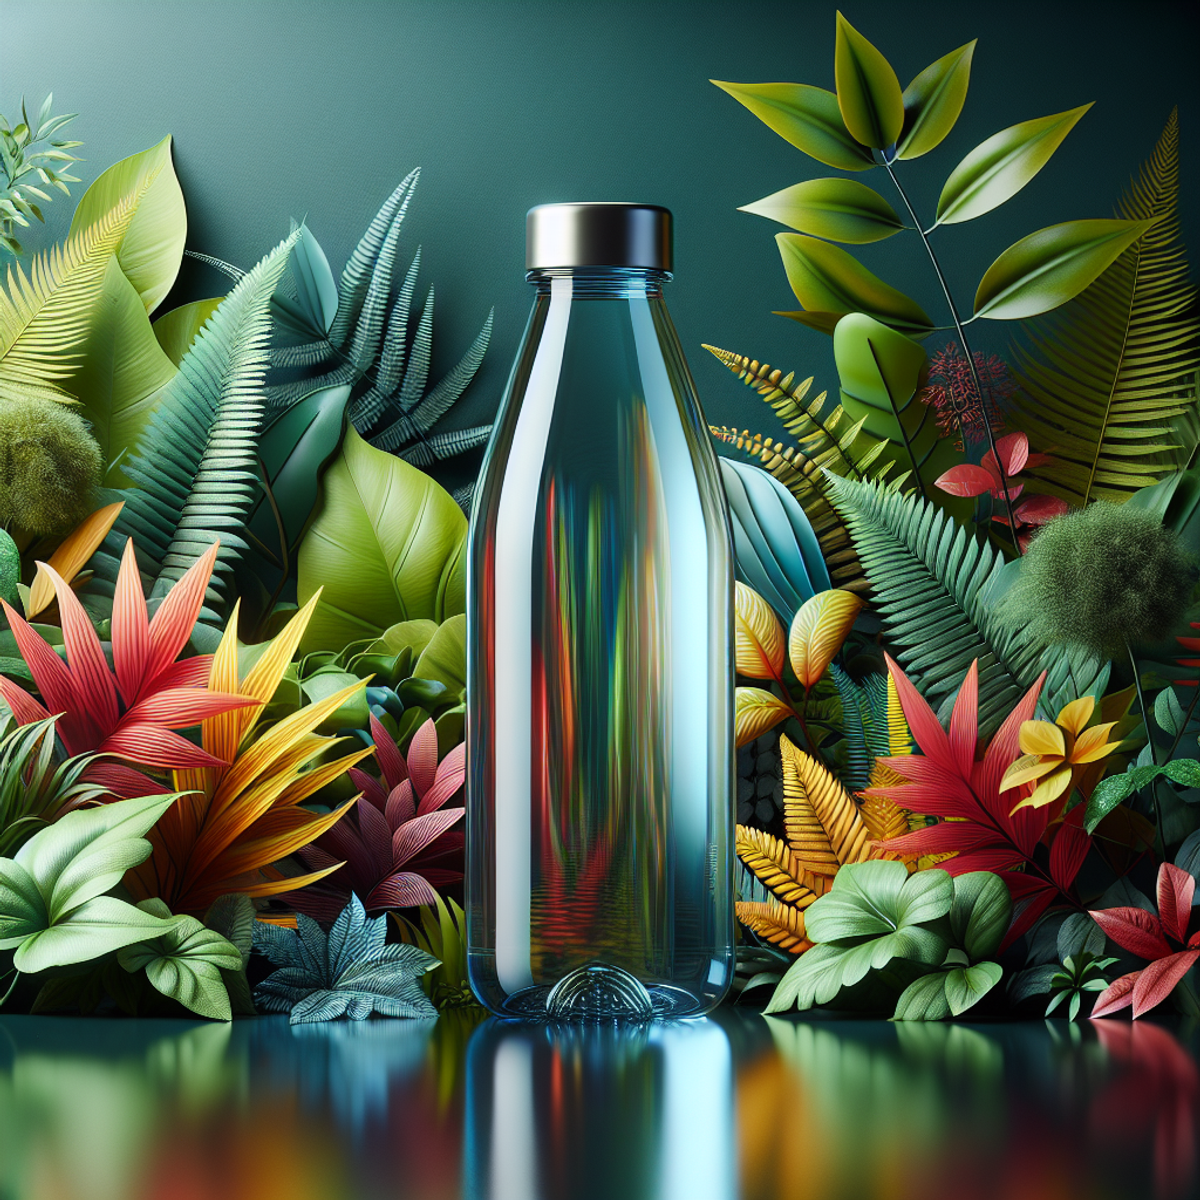 A glass water bottle surrounded by vibrant foliage.